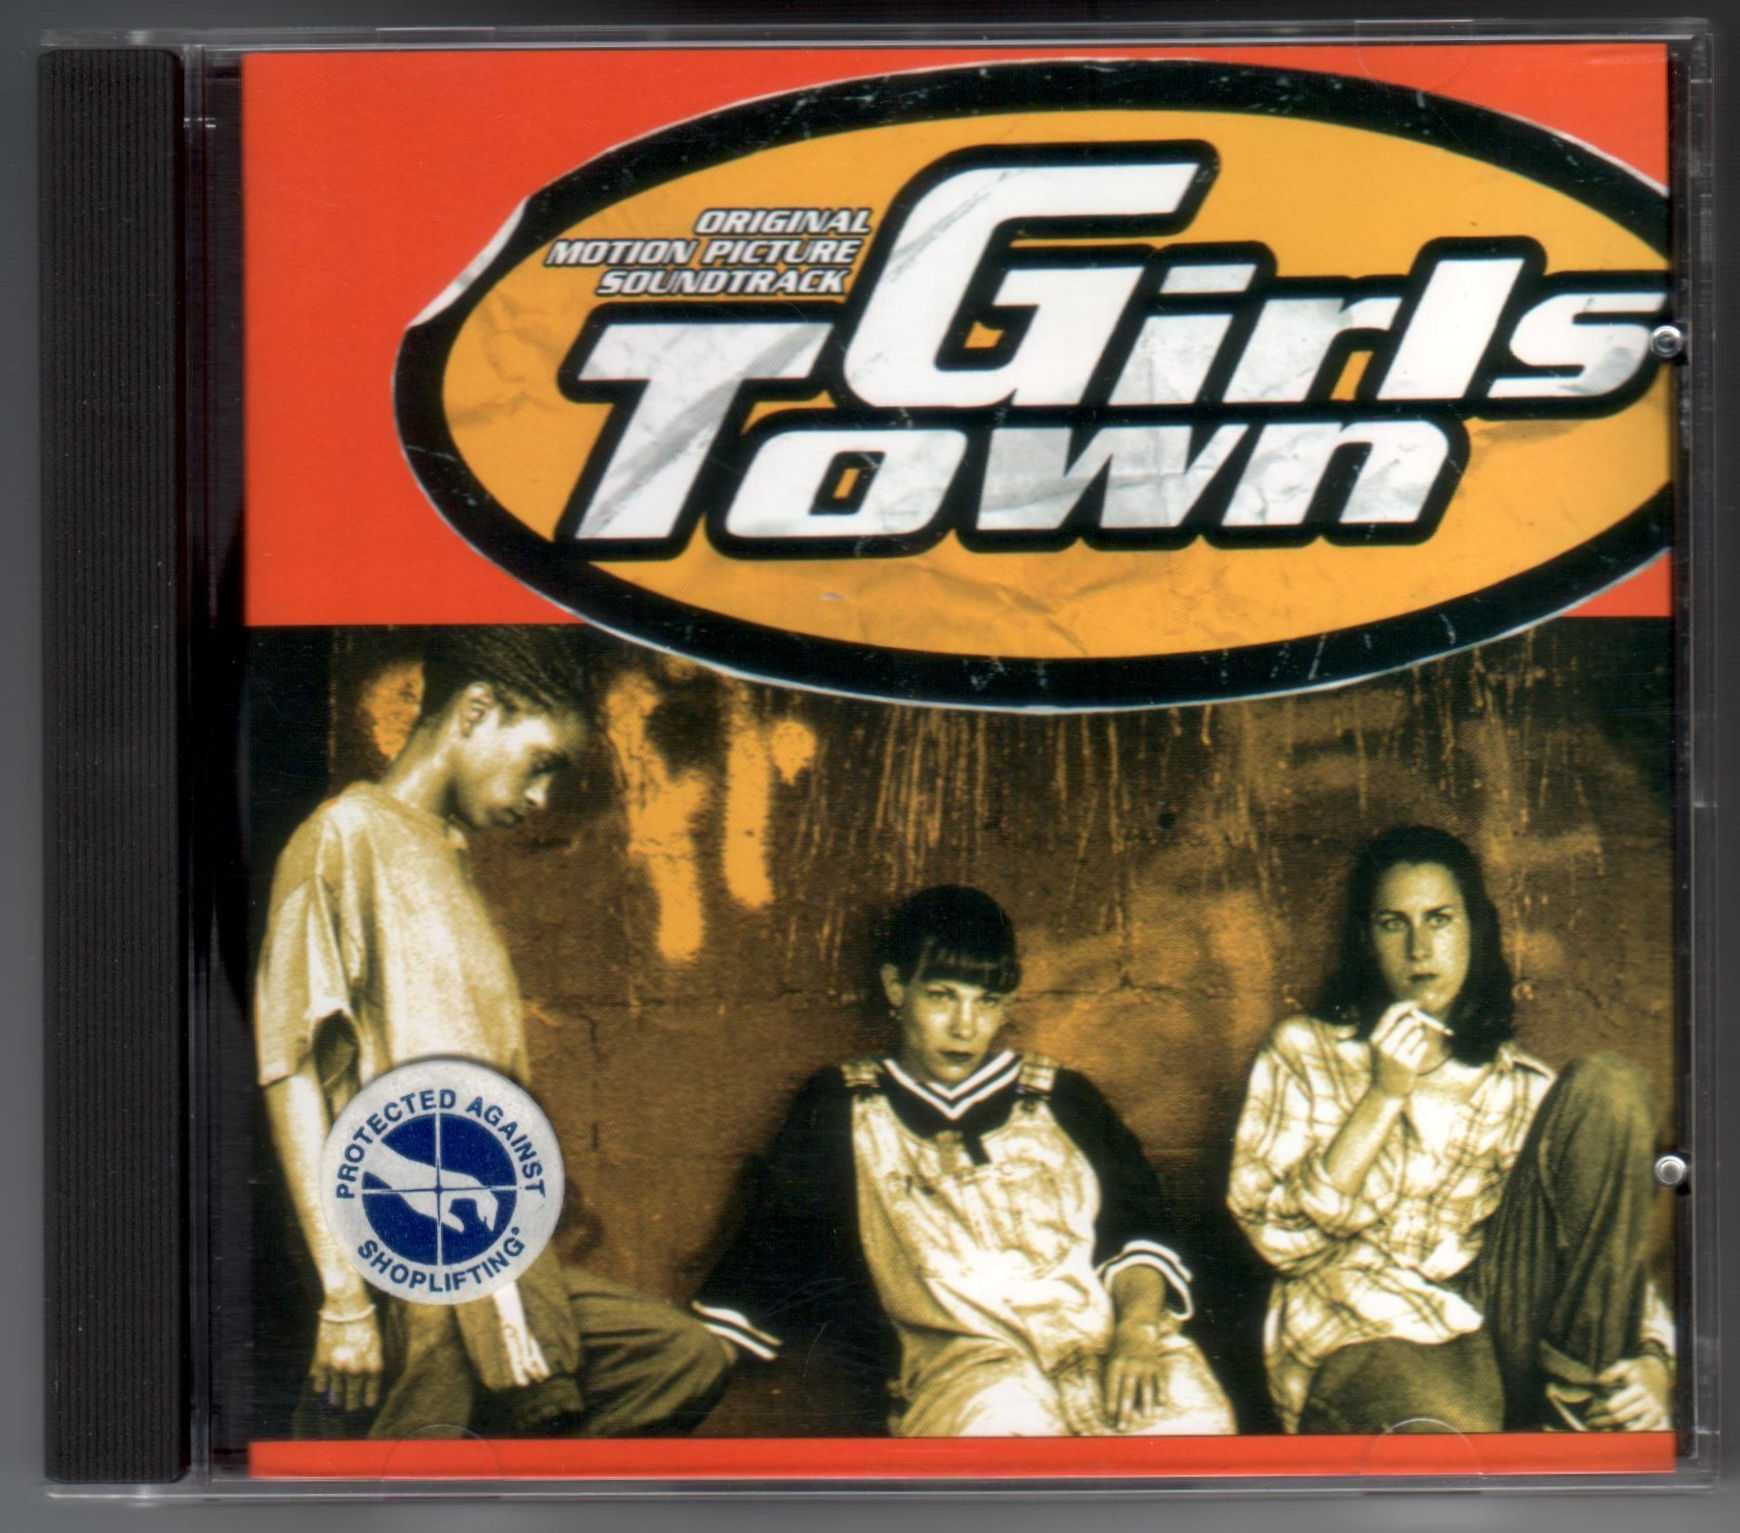 CD Girls Town - Original Motion Picture Soundtrack